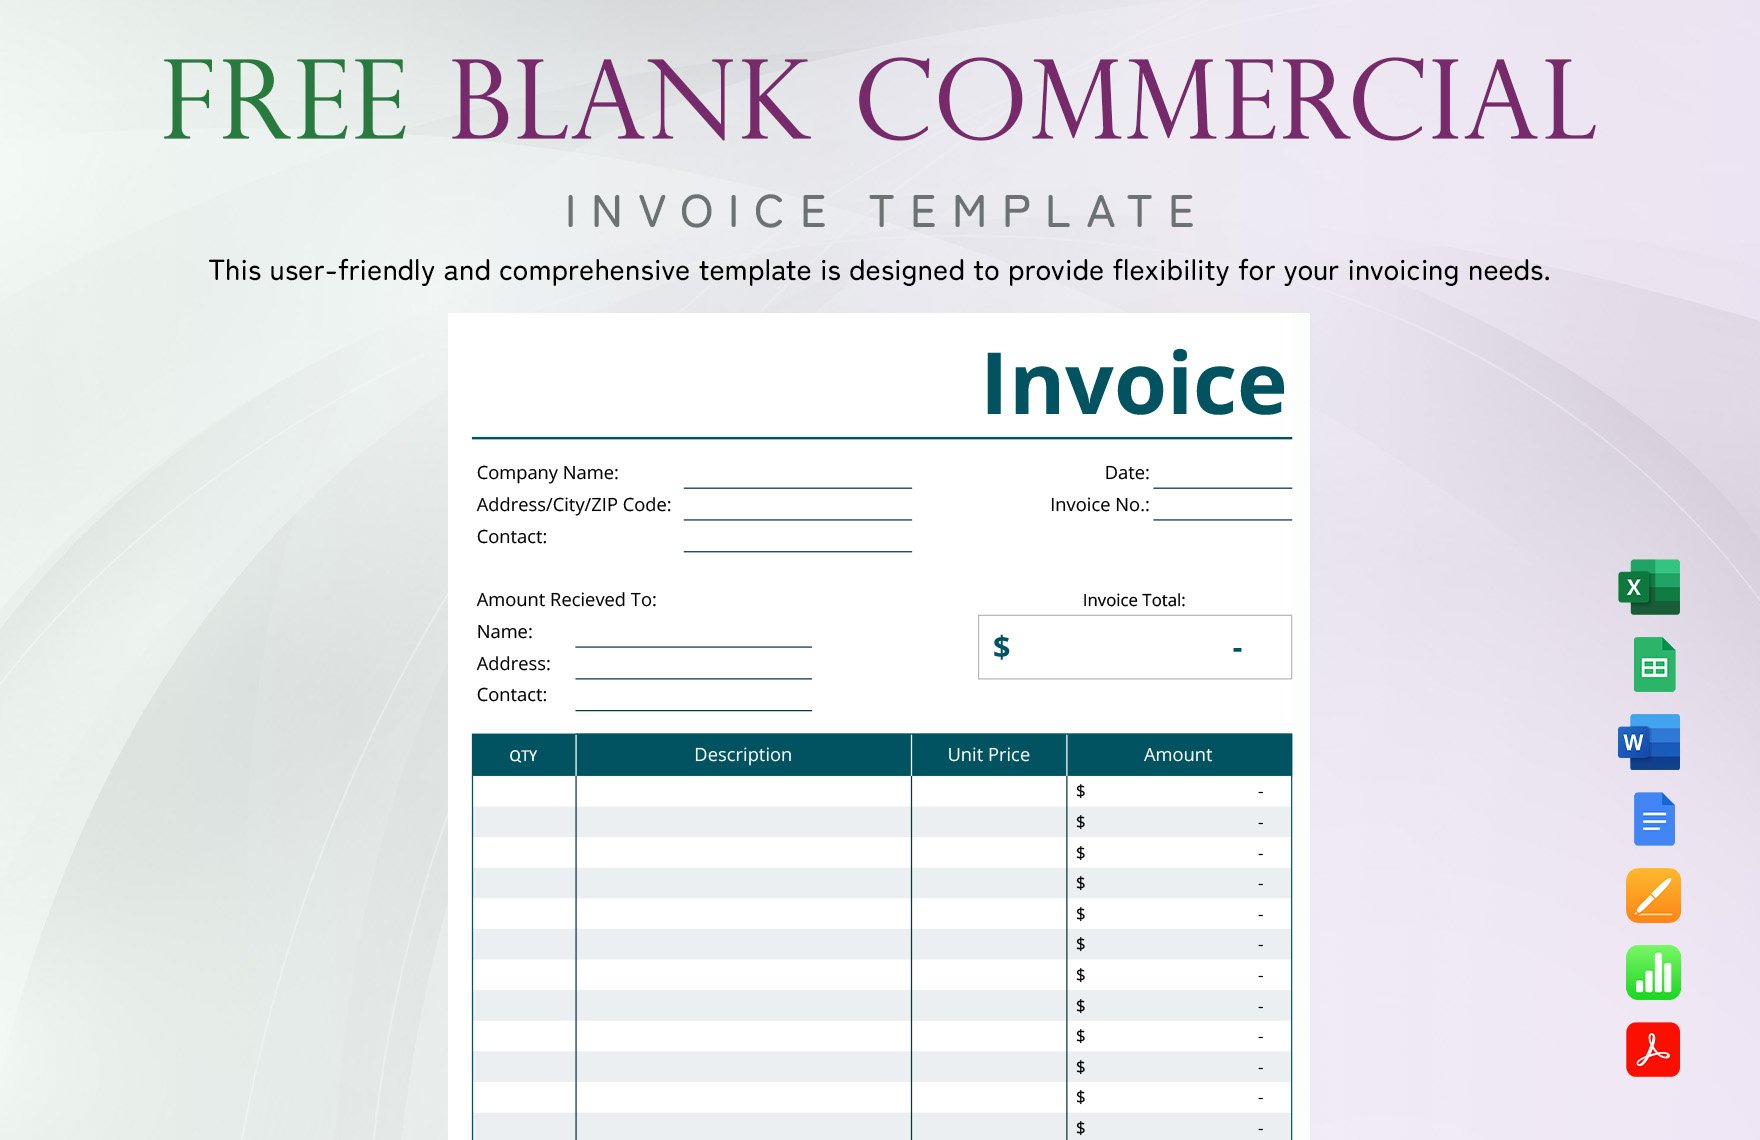 Blank Commercial Invoice Template in Word, Google Docs, Excel, PDF, Google Sheets, Illustrator, PSD, Apple Pages, Apple Numbers